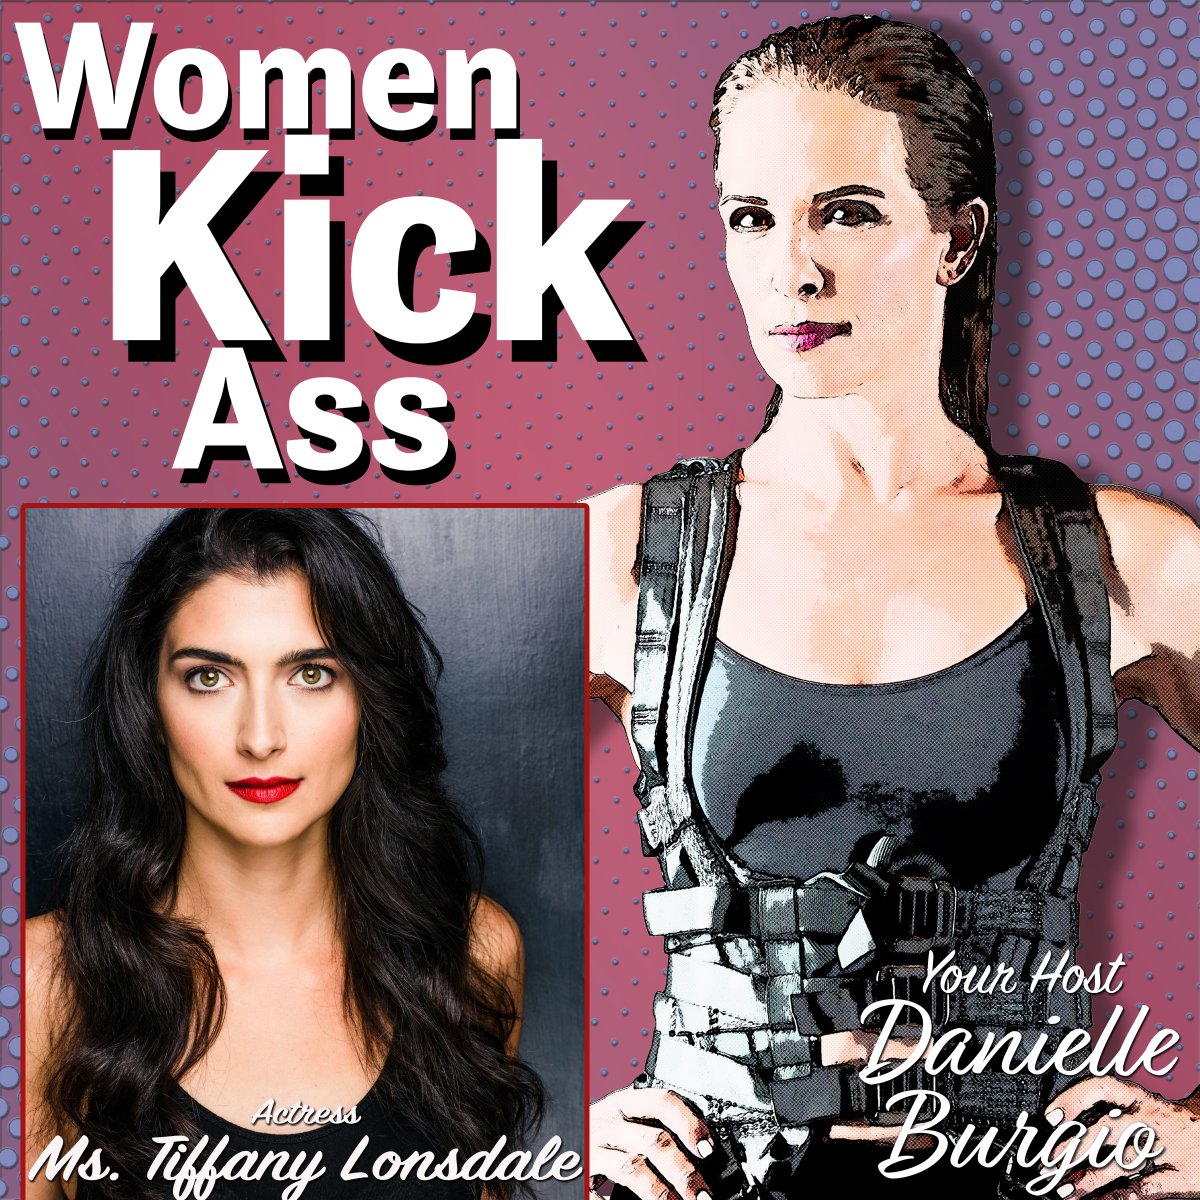 A #BadASS @SirenTV graces the #WomenKickAss Podcast with @DaniBurgio1111!! Listen in while #DanielleBurgio speaks with @tiffanylonsdale about her amazing role on #Siren Season 3, athletics and health!

Tune in:  directory.libsyn.com/episode/index/…

Produced by @jhammondc